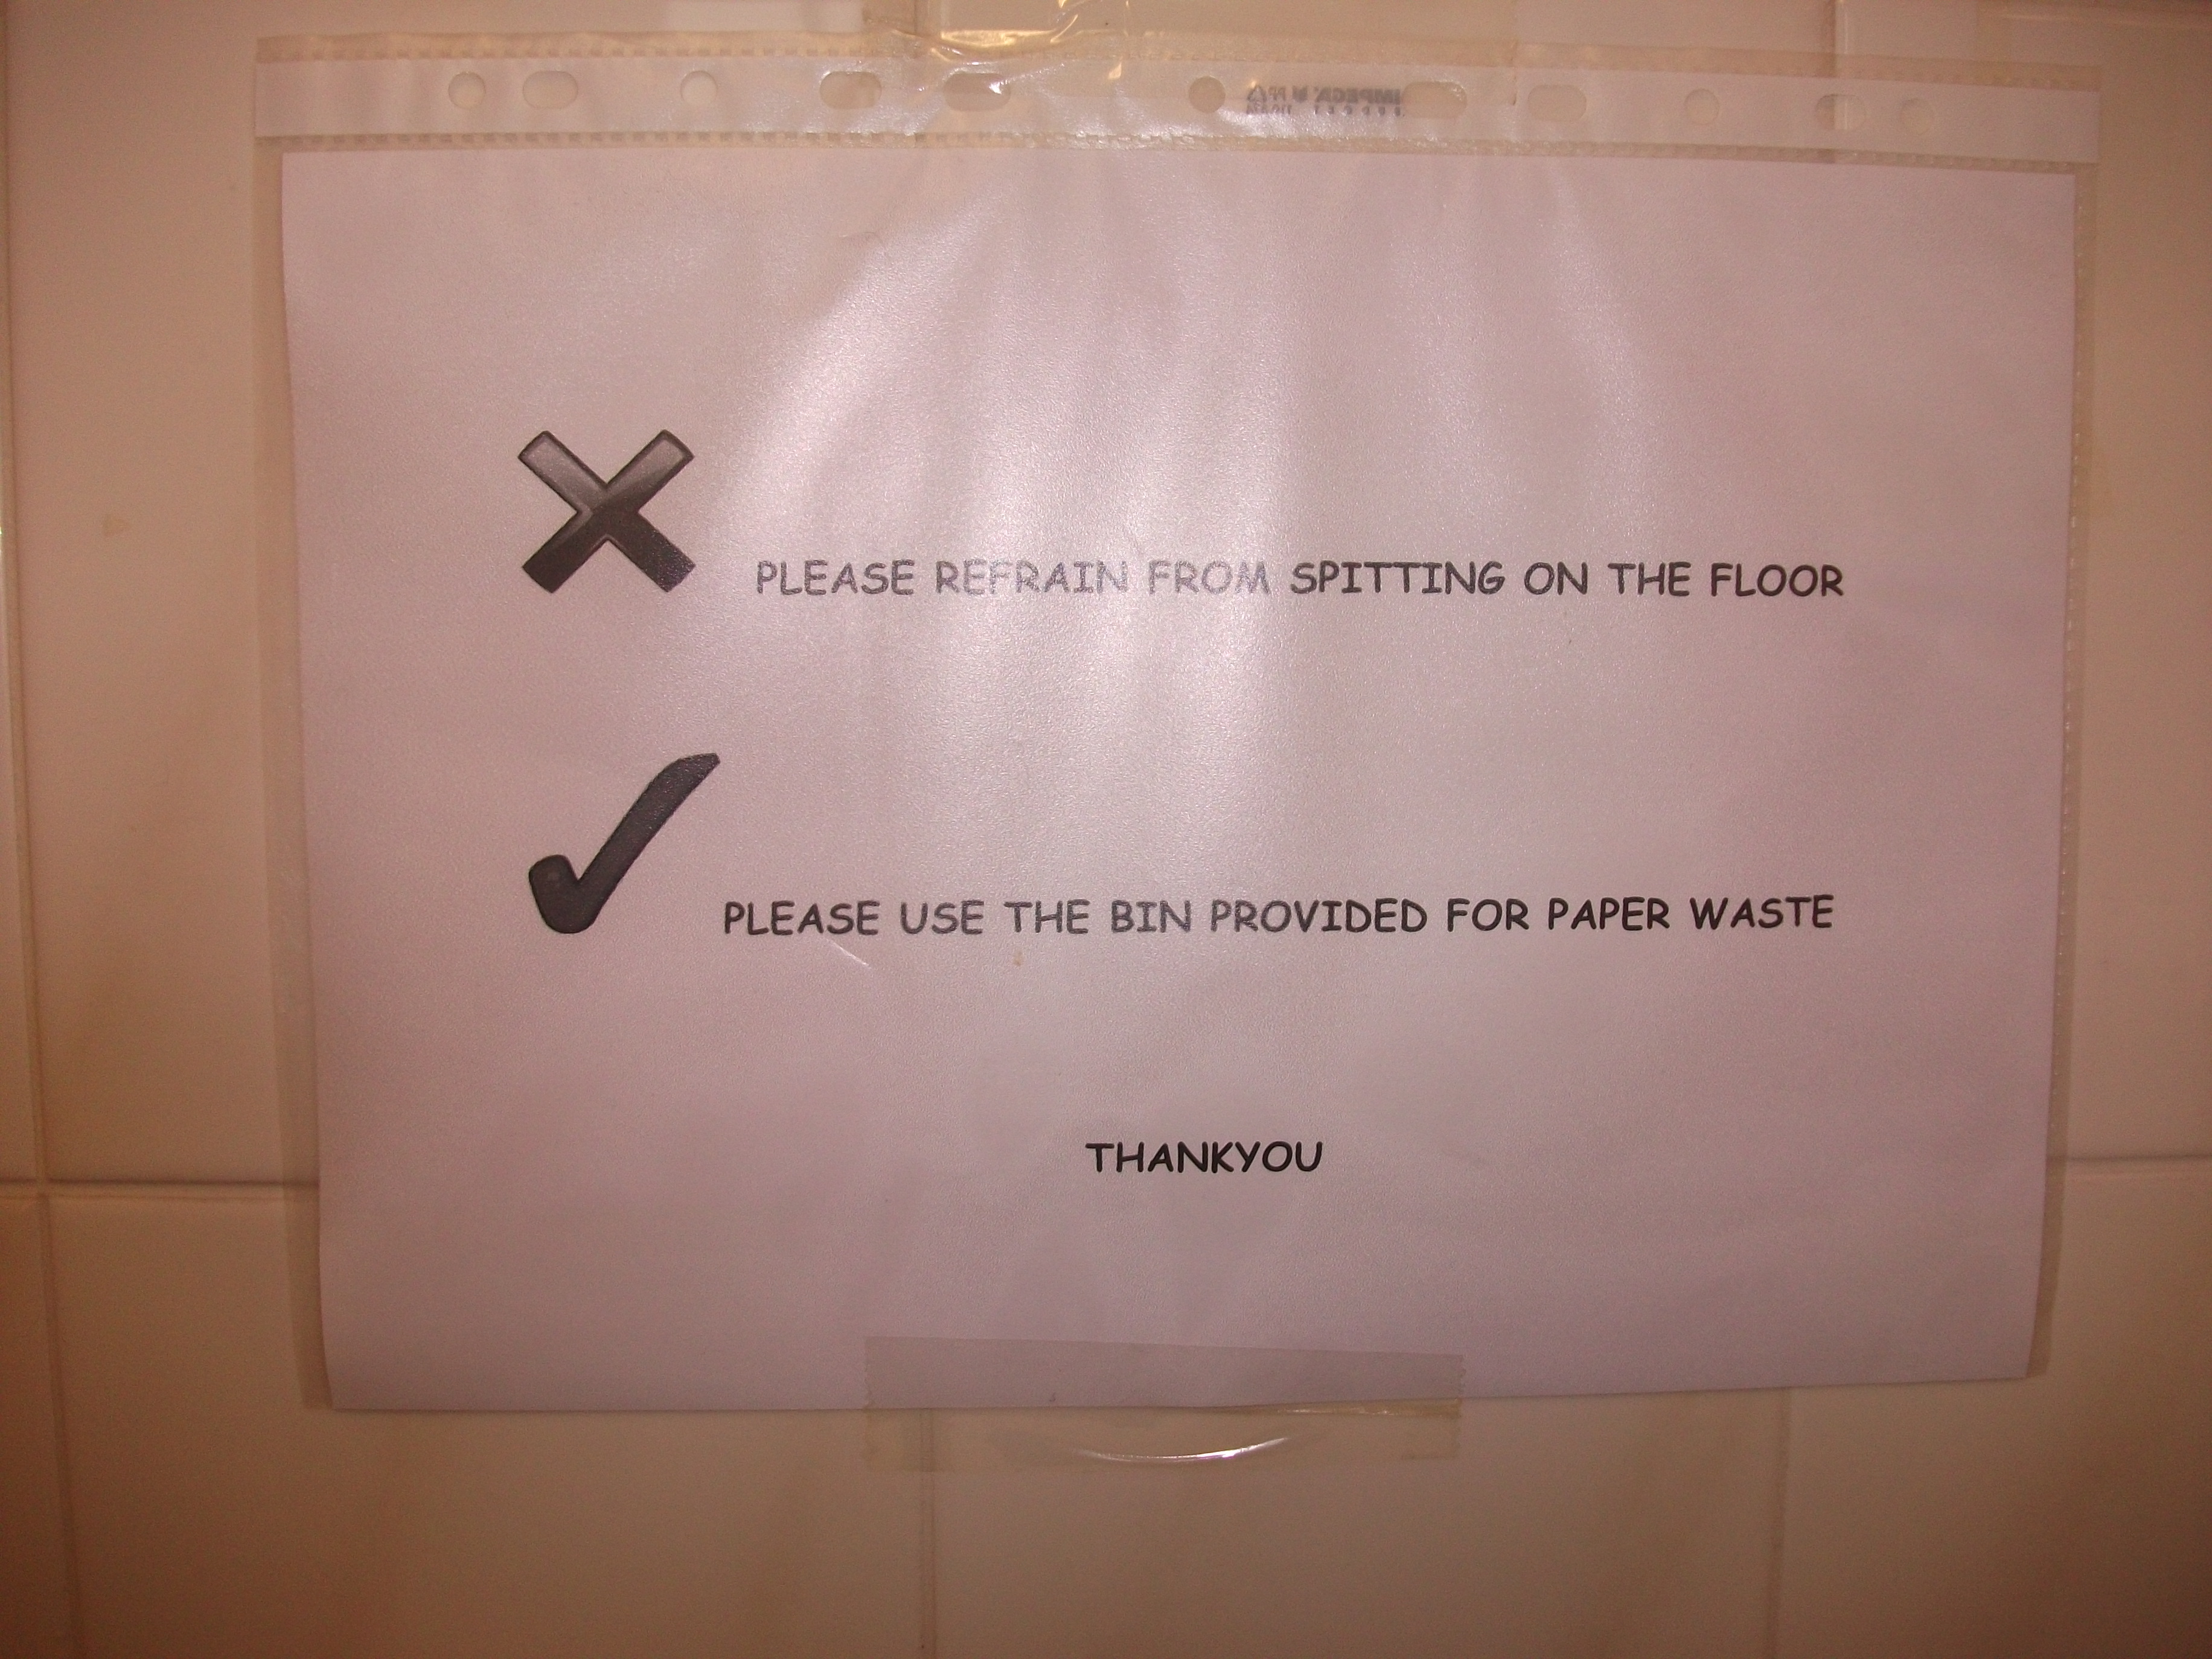 Soon after the local gypsy camp moved in, this sign appeared randomly in the nearby public toilet. 